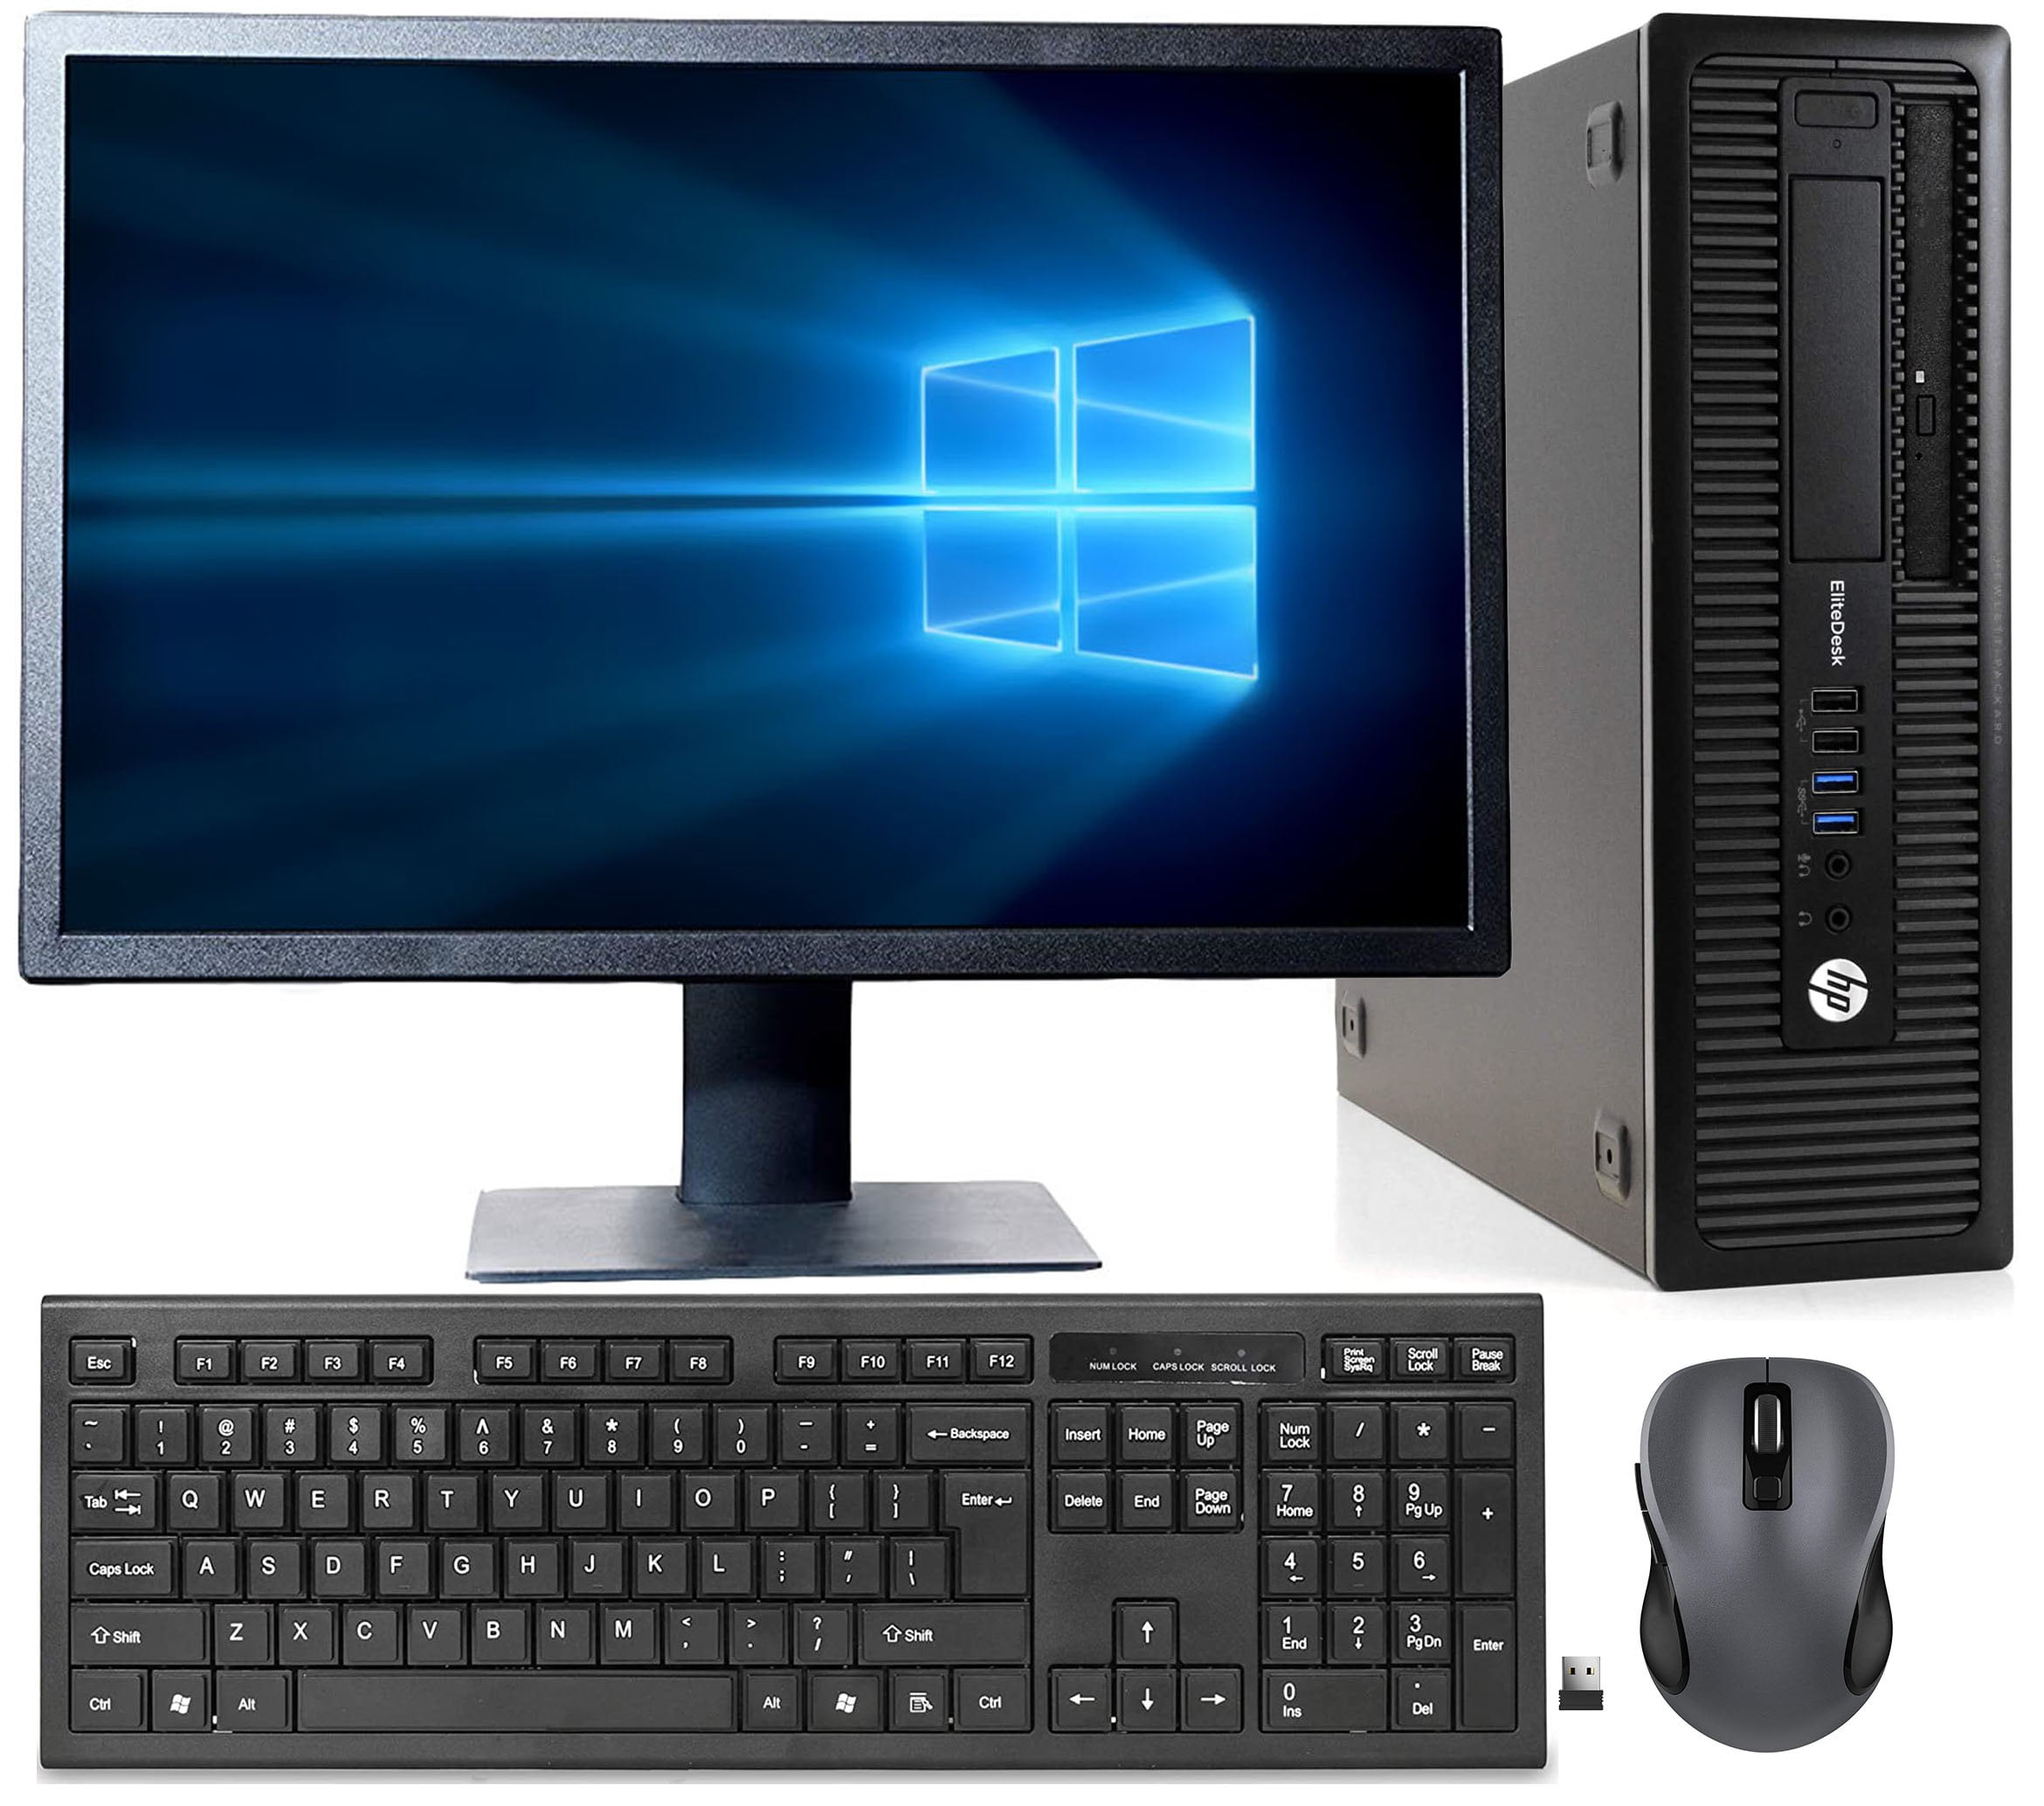 HP 800 G1 DT Fast Gaming PC Windows 10 Pro Intel Core i5 Nividia GeForce GT 730 4GB Desktop with a 19" Monitor (Refurbished)